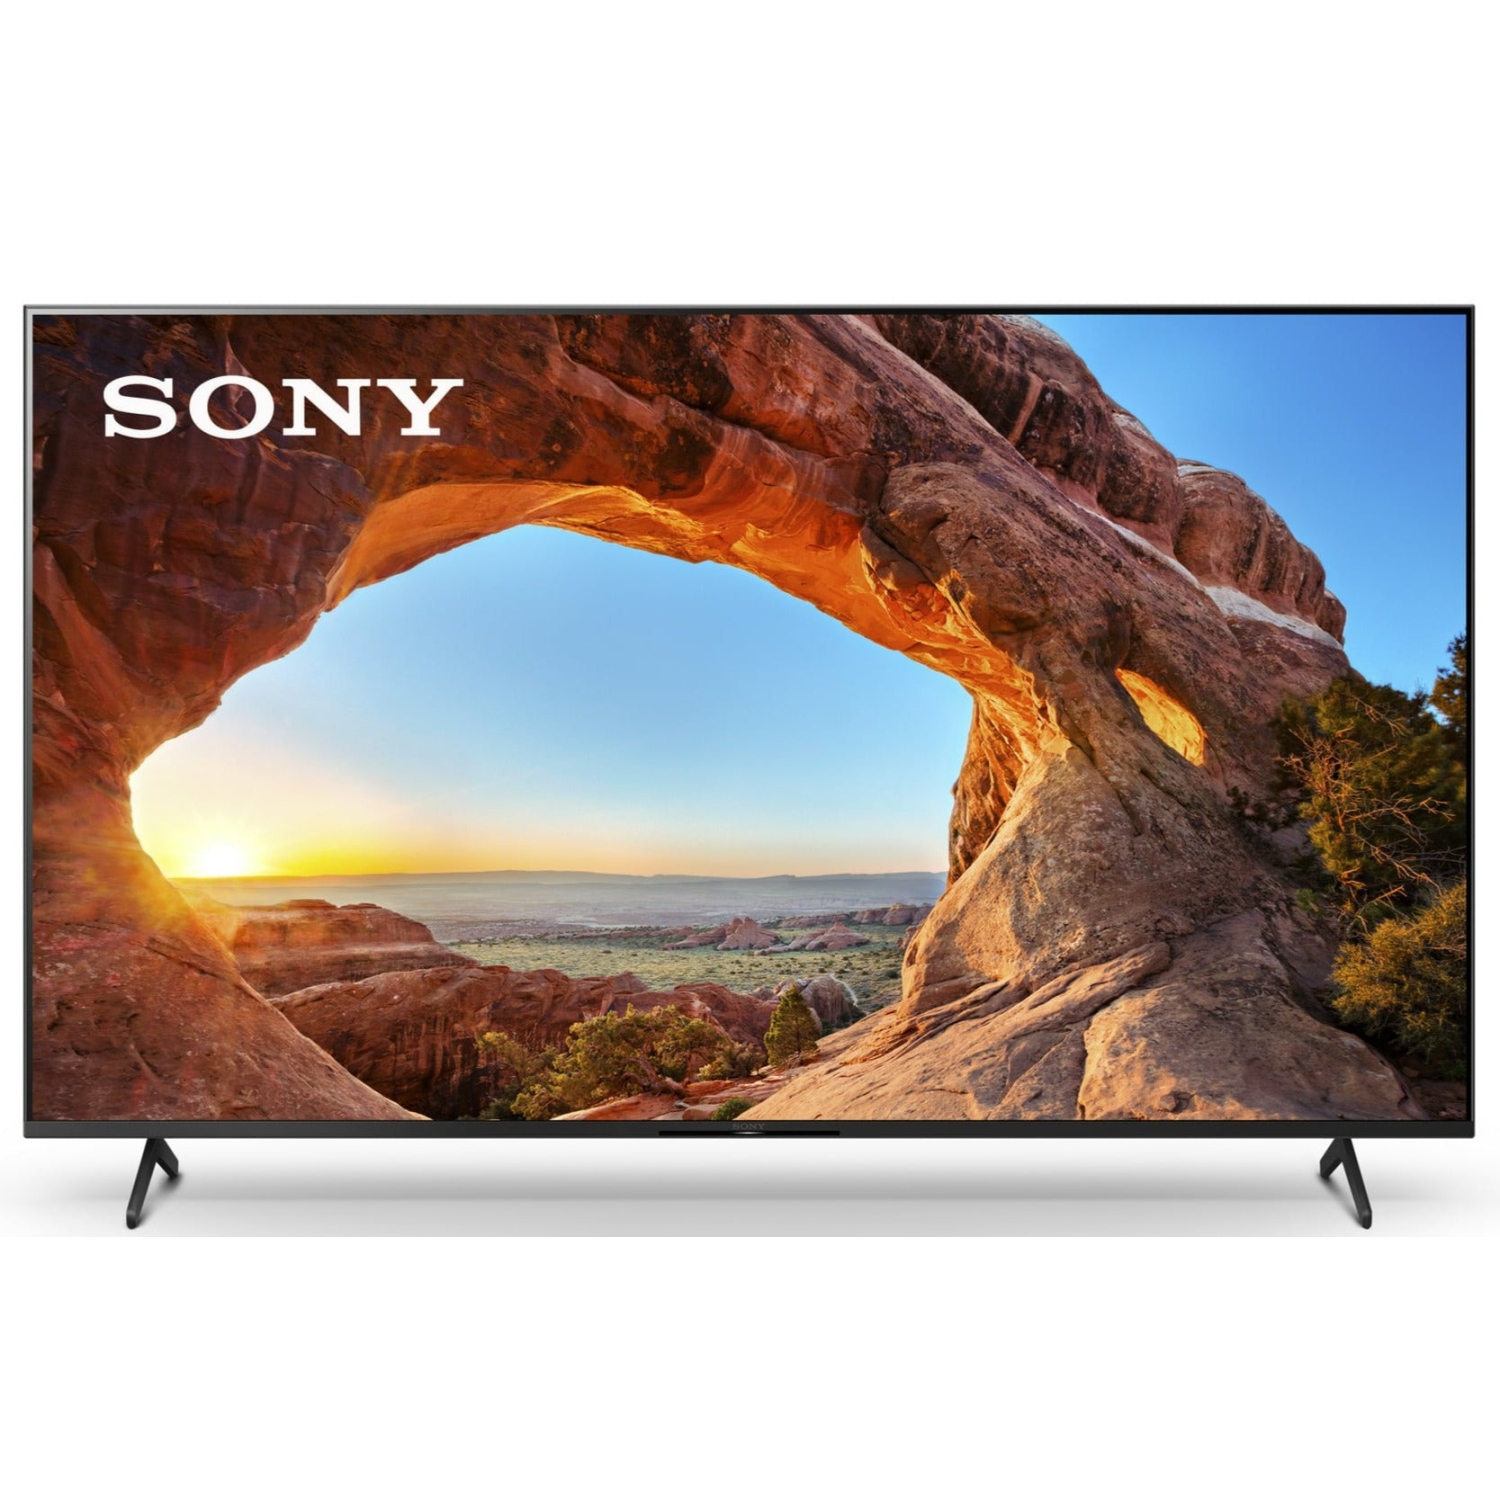 Refurbished (Good) Sony 65" Class 4K Ultra HD LED Smart Google TV with Dolby Vision HDR X85J Series (KD65X85J)